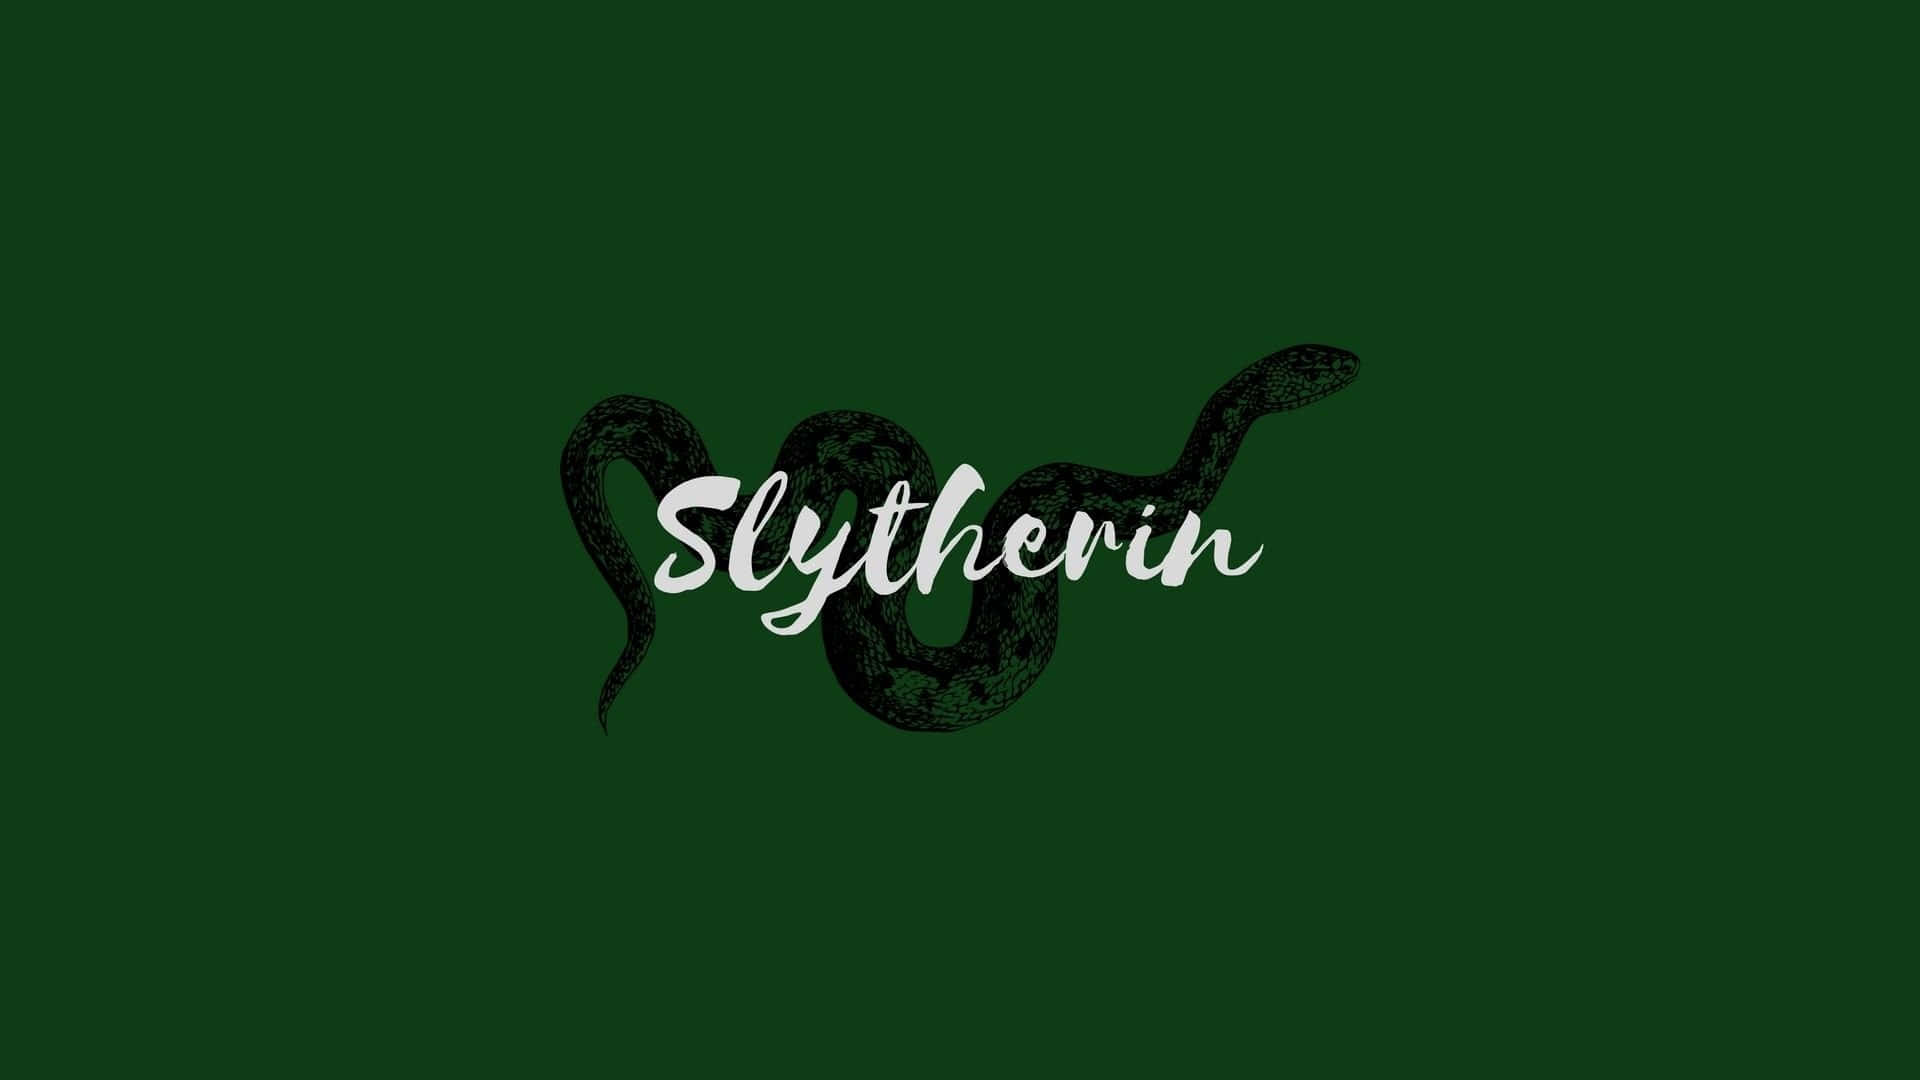 Slytherin is more than just a house, it's an identity. Wallpaper